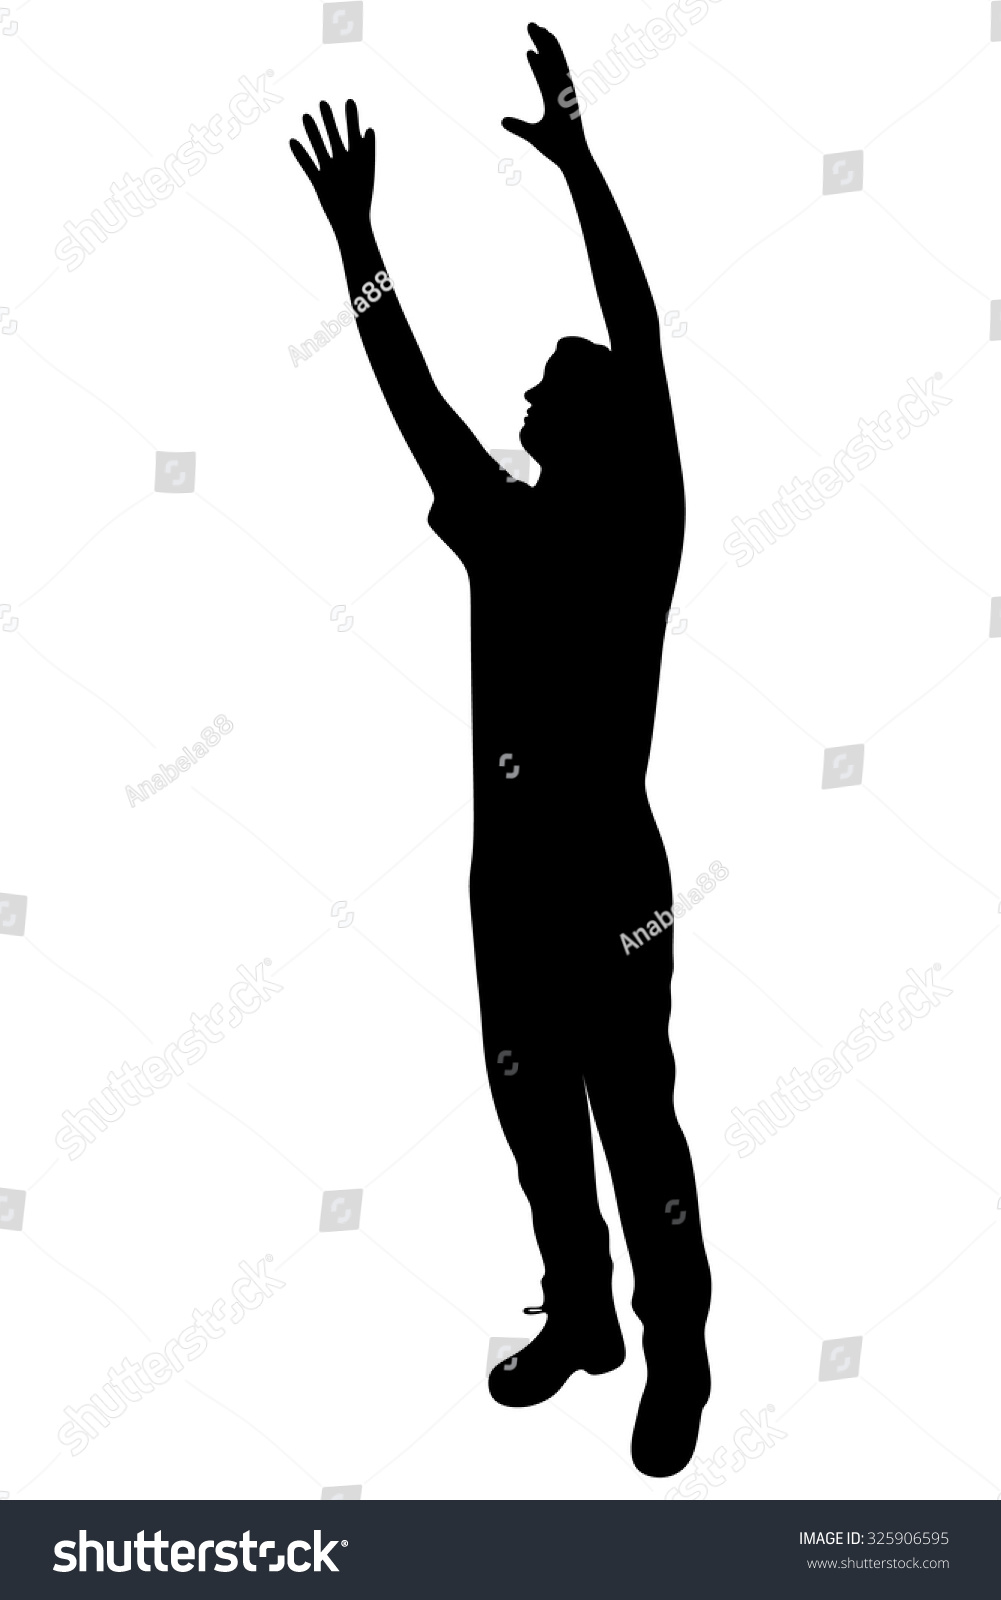 Silhouette man reaching up Images, Stock Photos & Vectors Shutterstock